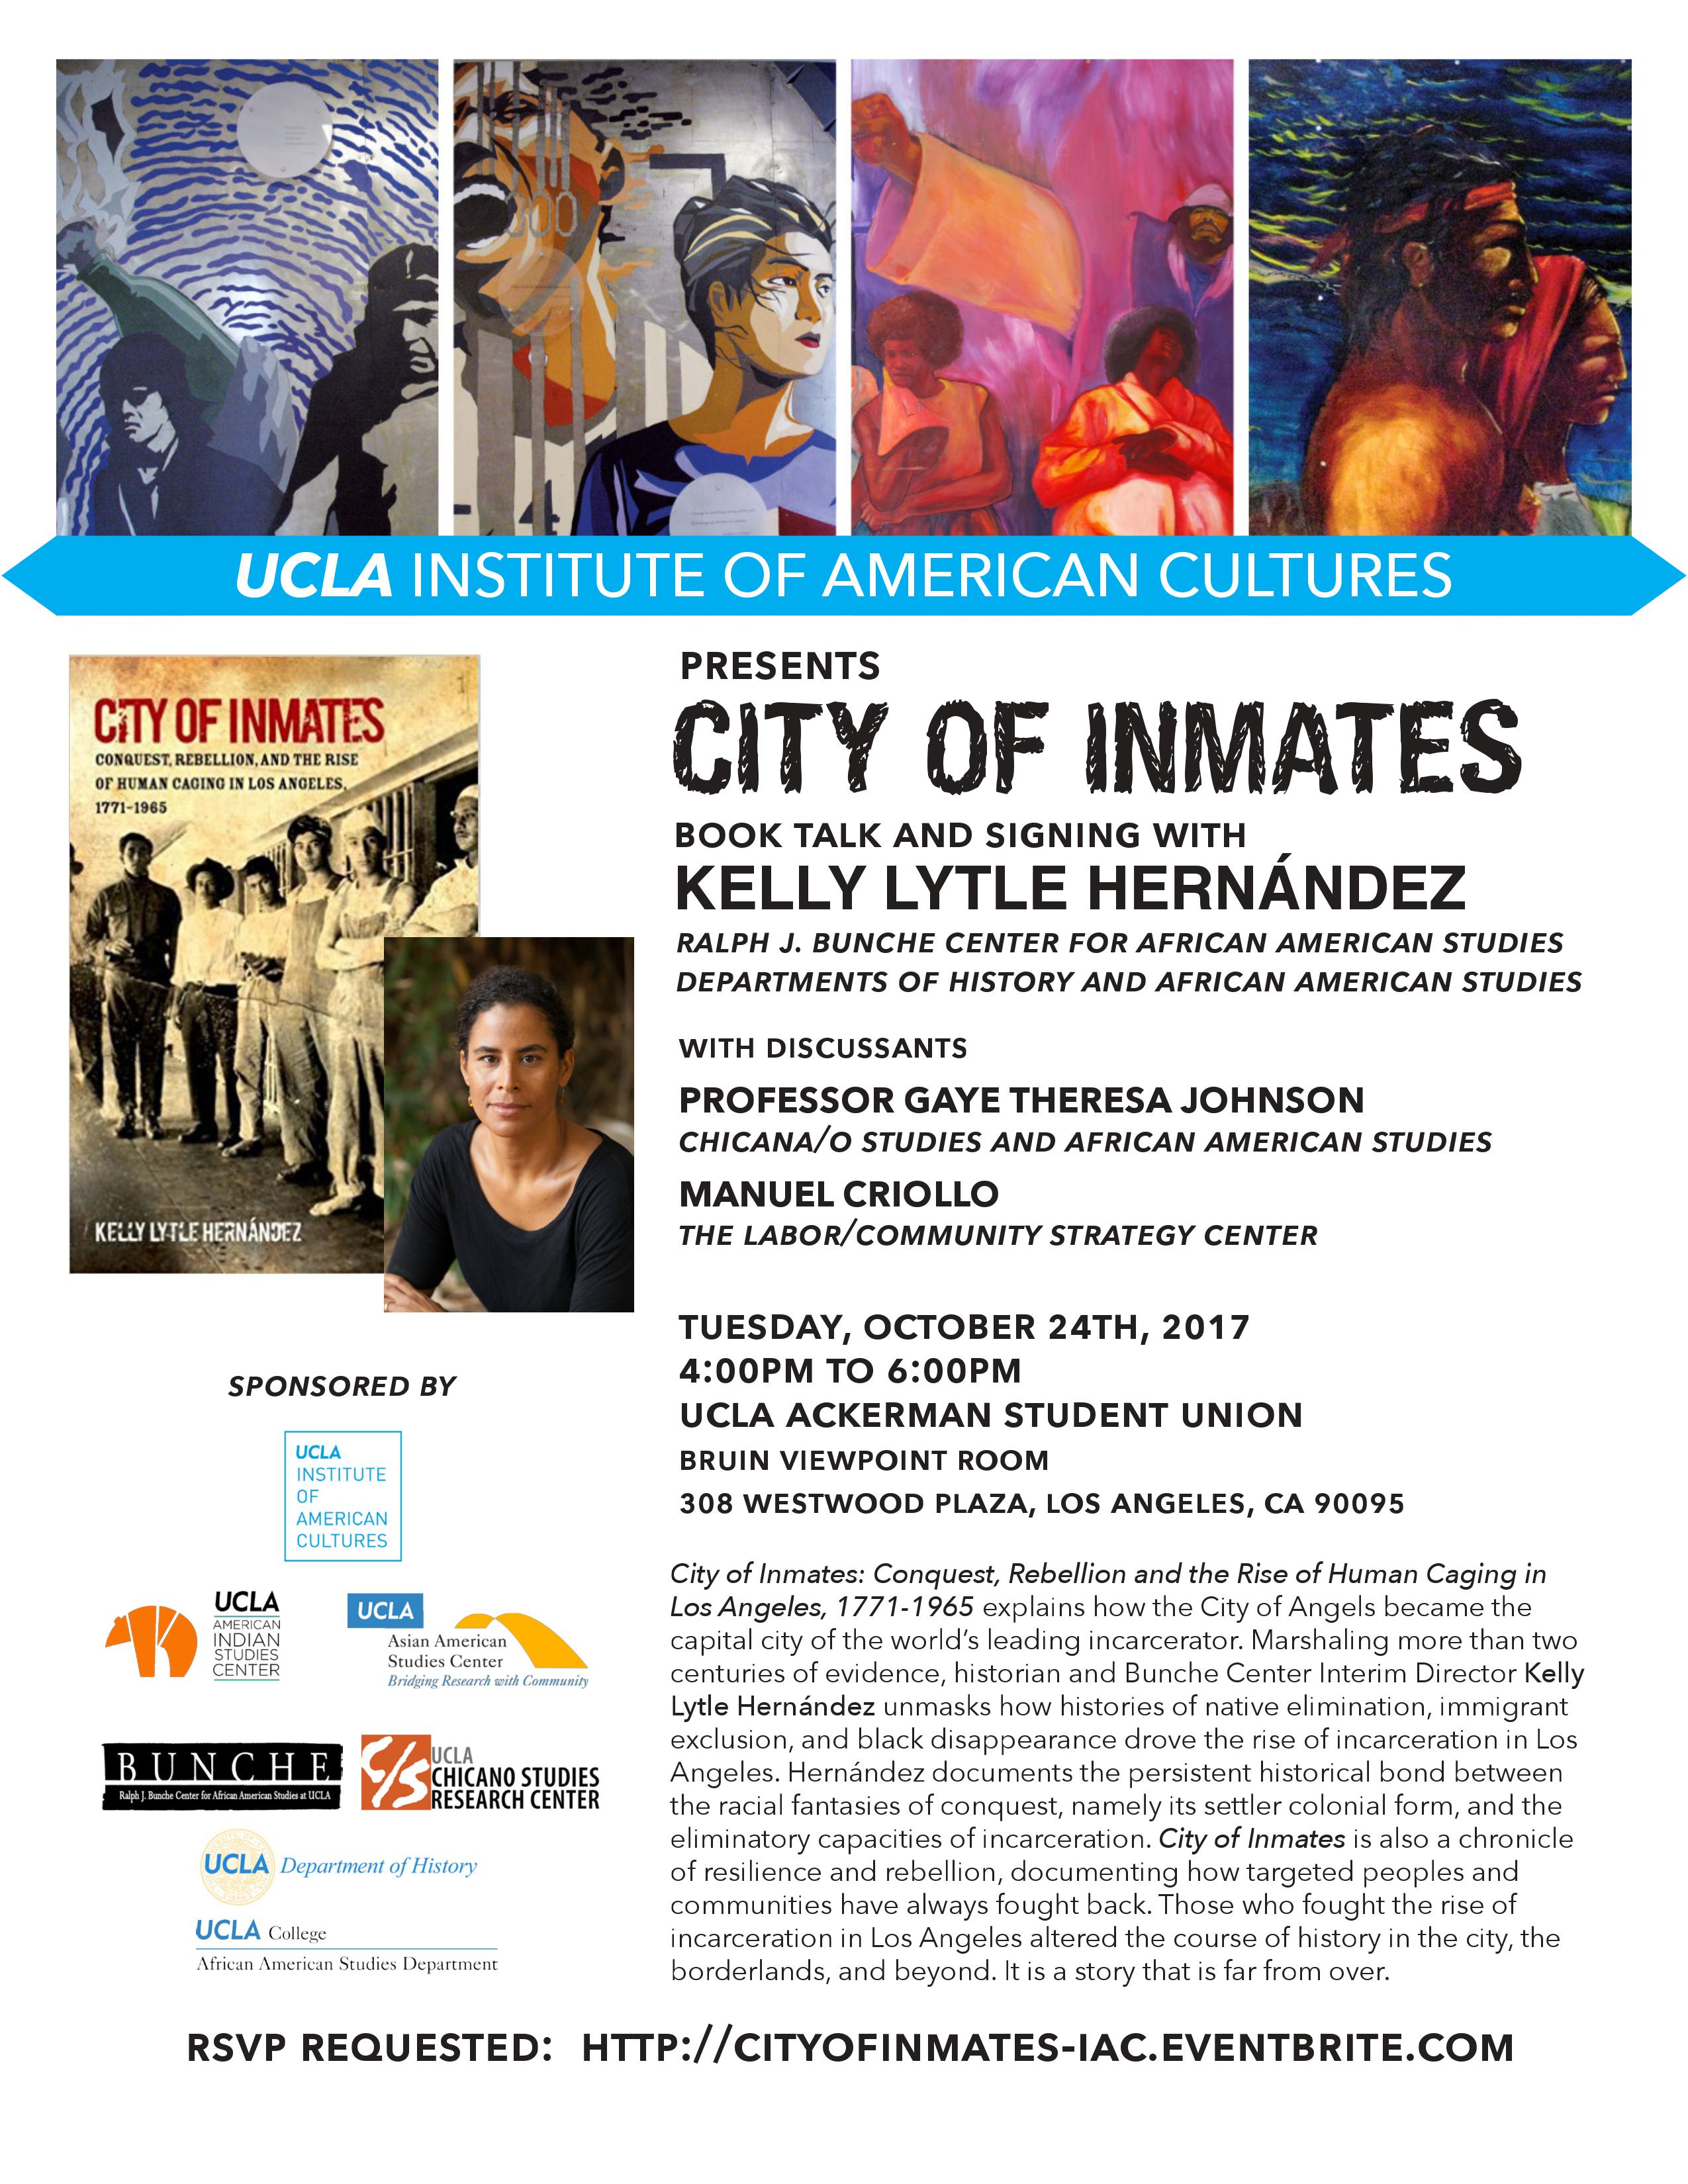 City of Inmates Book Talk and Signing with Kelly Lytle Hernandez on